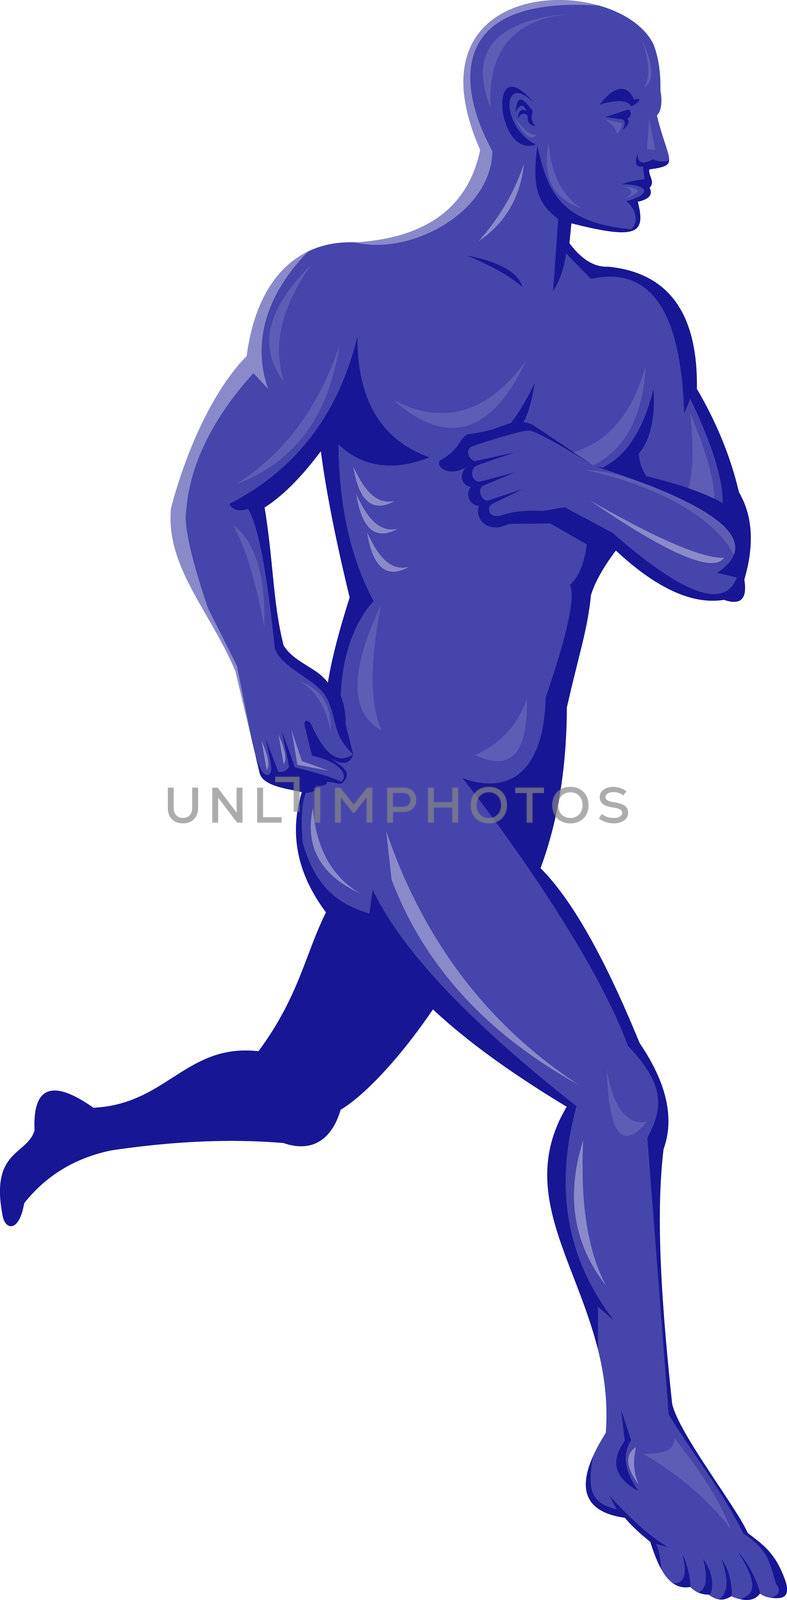 illustration of a Purple human male running isolated on white background.